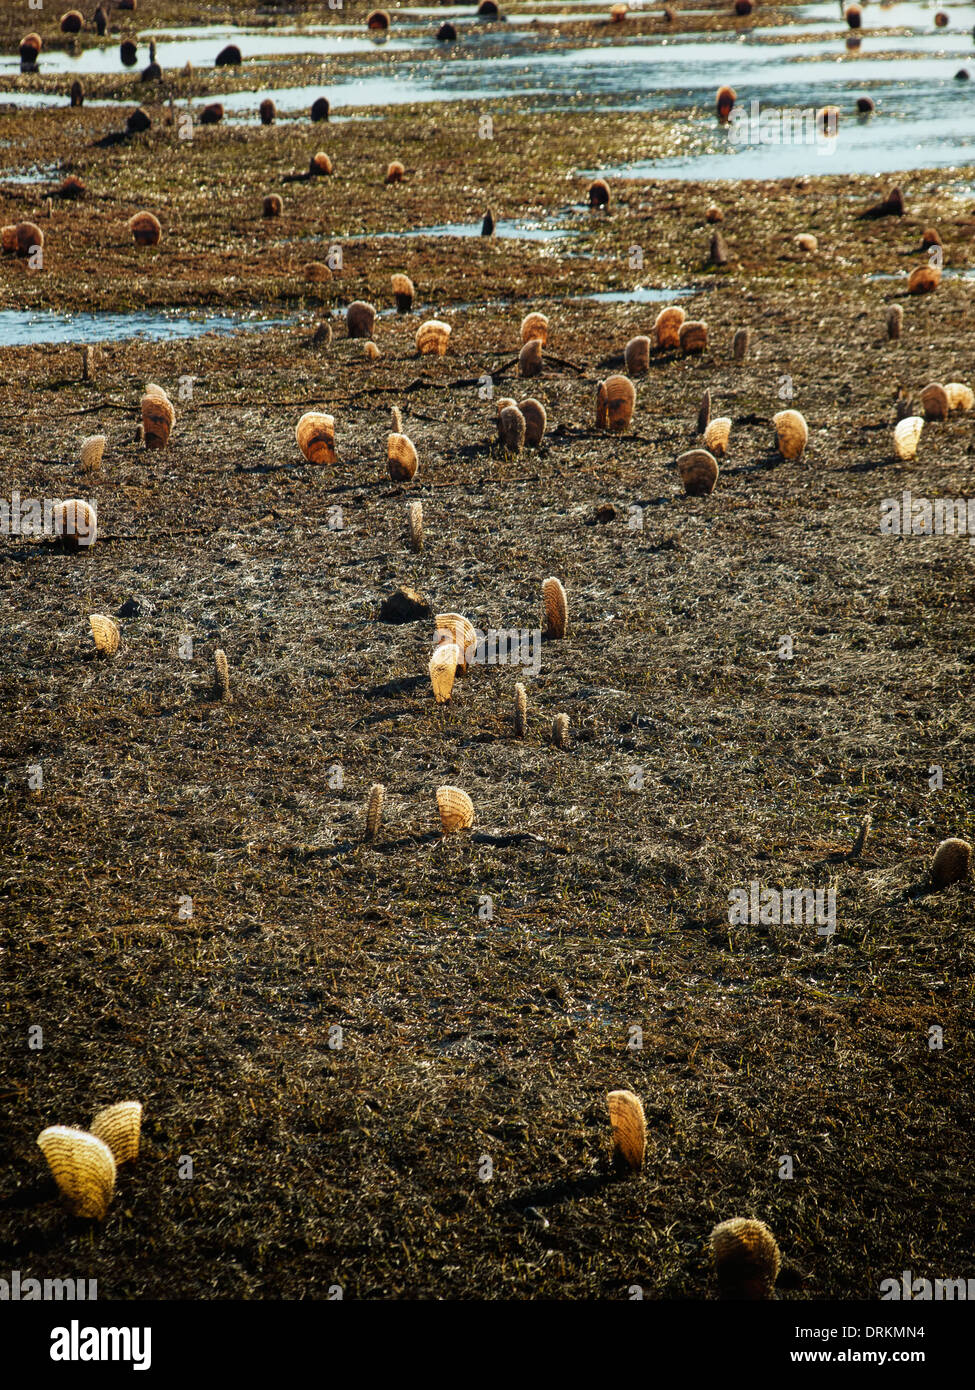 Lot of Pen-shells out of sea during strong ebb tide. Stock Photo